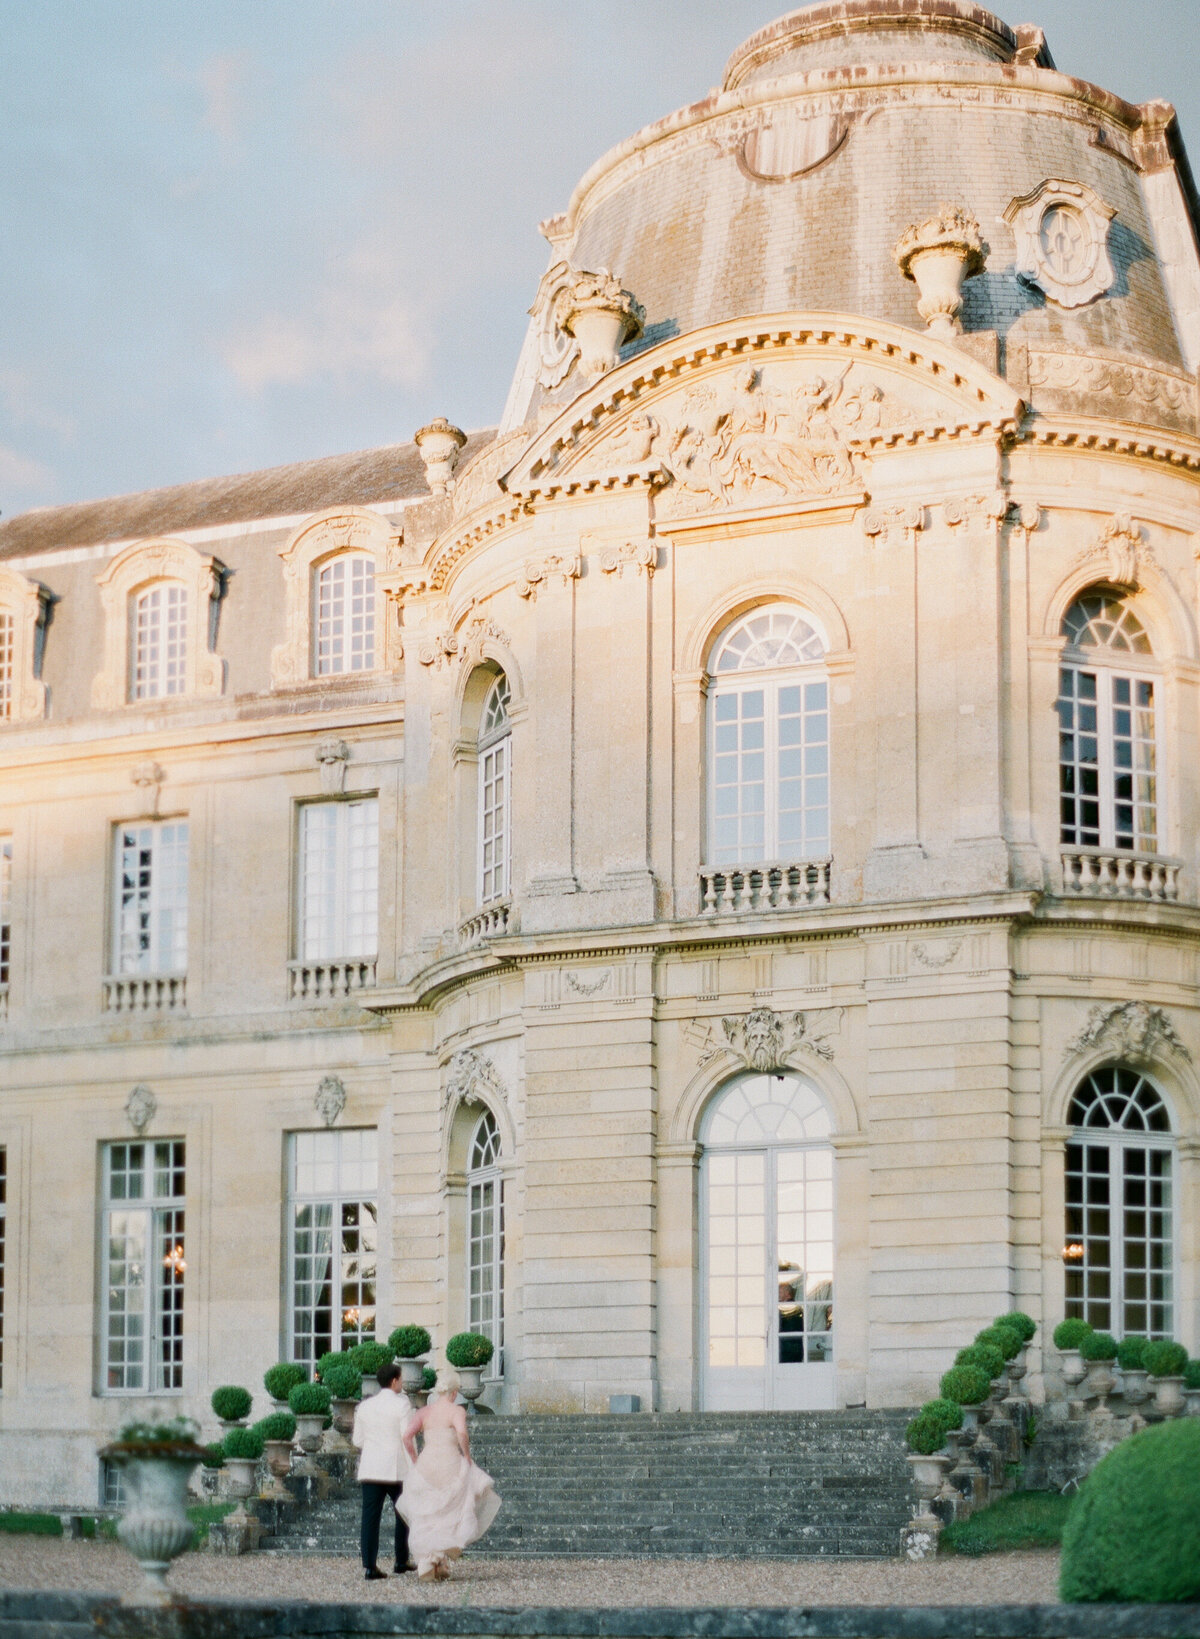 Jennifer Fox Weddings English speaking wedding planning & design agency in France crafting refined and bespoke weddings and celebrations Provence, Paris and destination Laurel-Chris-Chateau-de-Champlatreaux-Molly-Carr-Photography-93